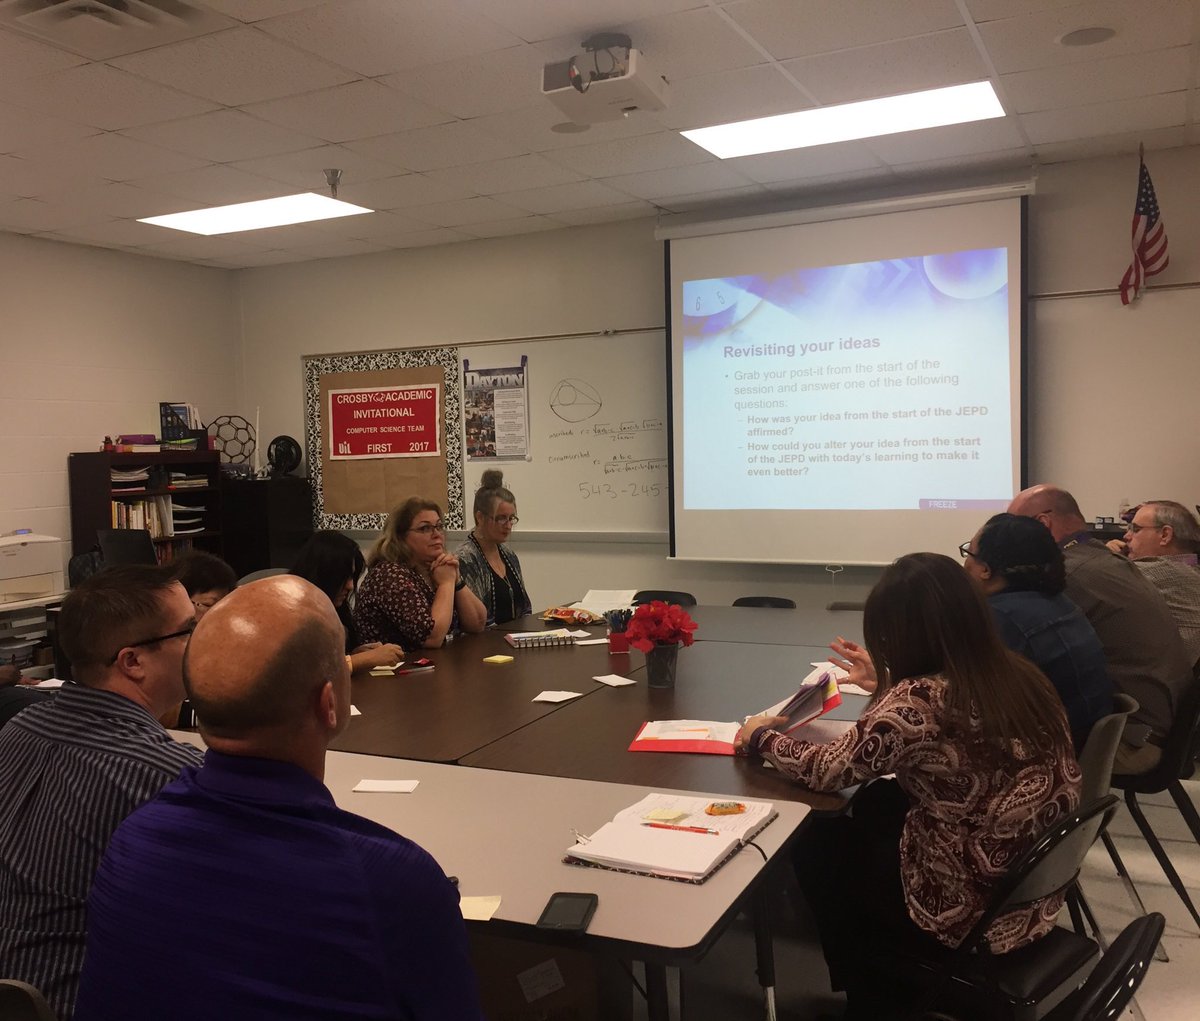 Dayton HS instructional coaches & teachers working on improving learning by refining lesson closure techniques. #DHSBroncoPride #DHSLearning